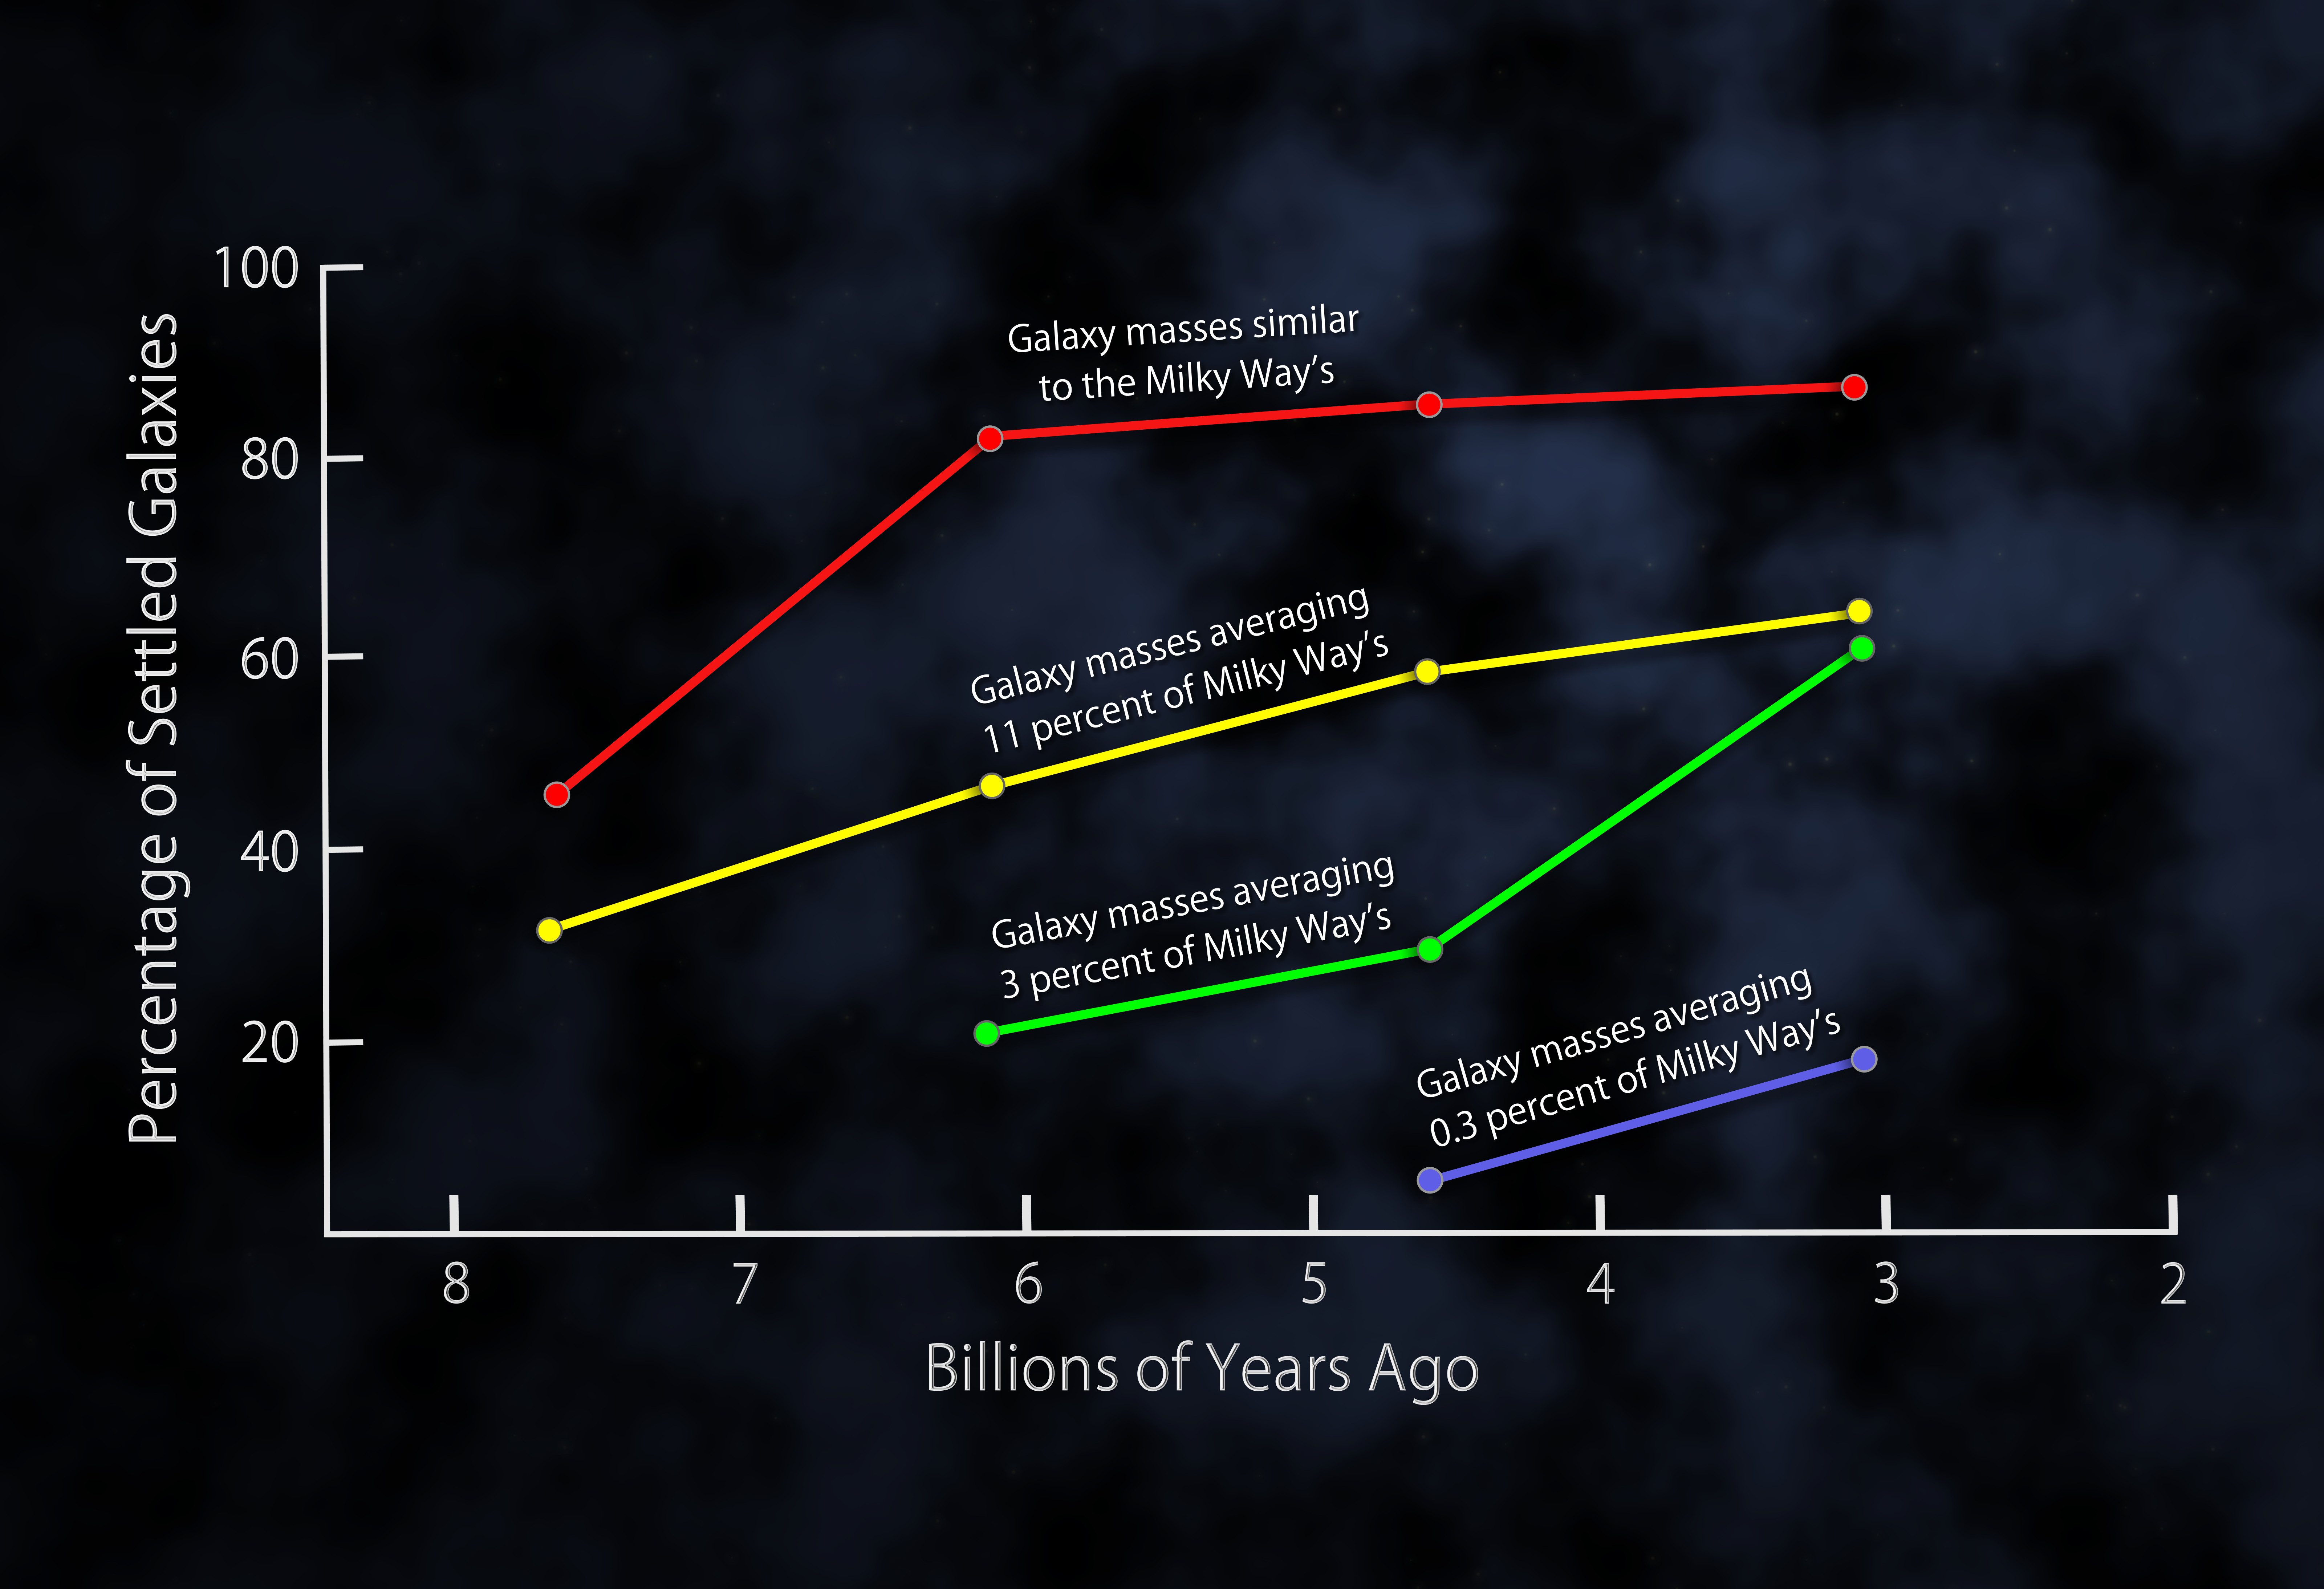 This plot shows the fractions of settled disk galaxies in four time spans, each about 3 billion years long. There is a steady shift toward higher percentages of settled galaxies closer to the present time. At any given time, the most massive galaxies are the most settled. More distant and less massive galaxies on average exhibit more disorganized internal motions, with gas moving in multiple directions, and slower rotation speeds.Credit: NASA/Goddard Space Flight Center